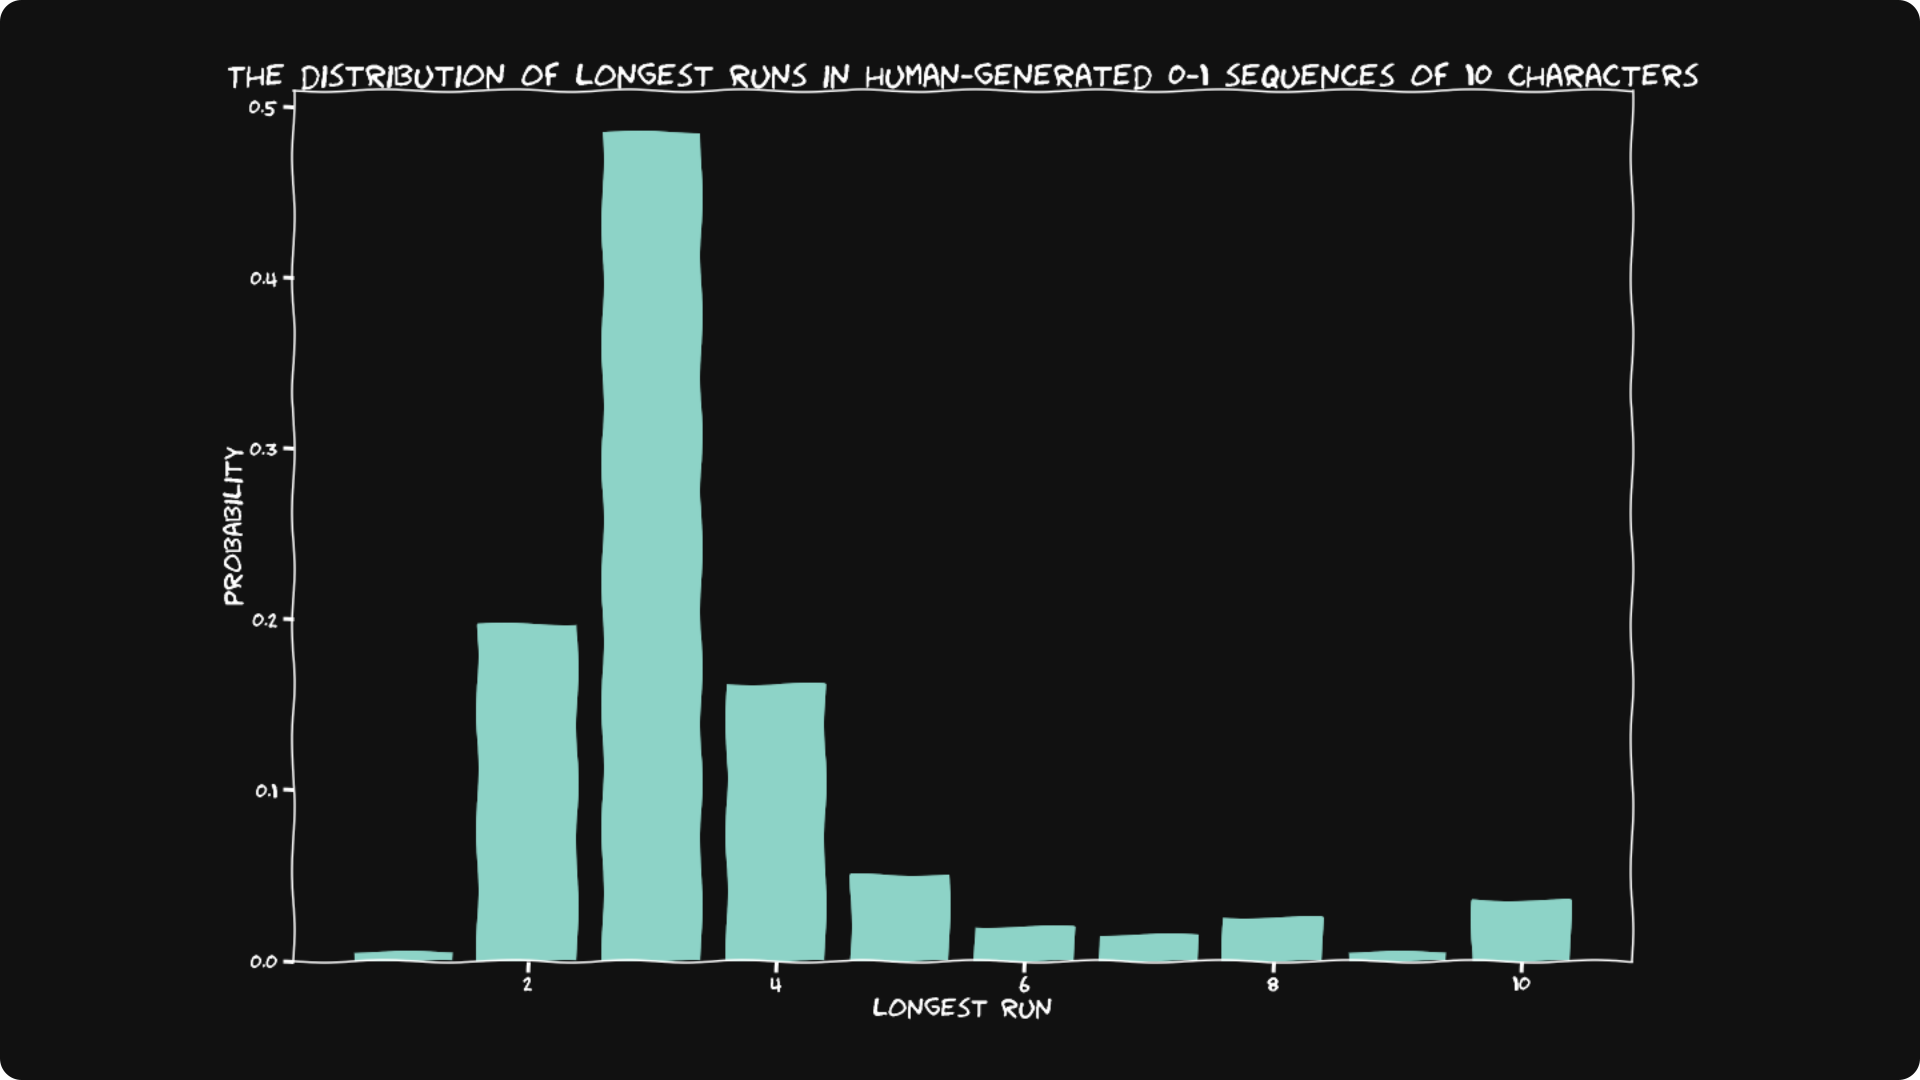 The distribution of longest runs in human-generated 0-1 sequences